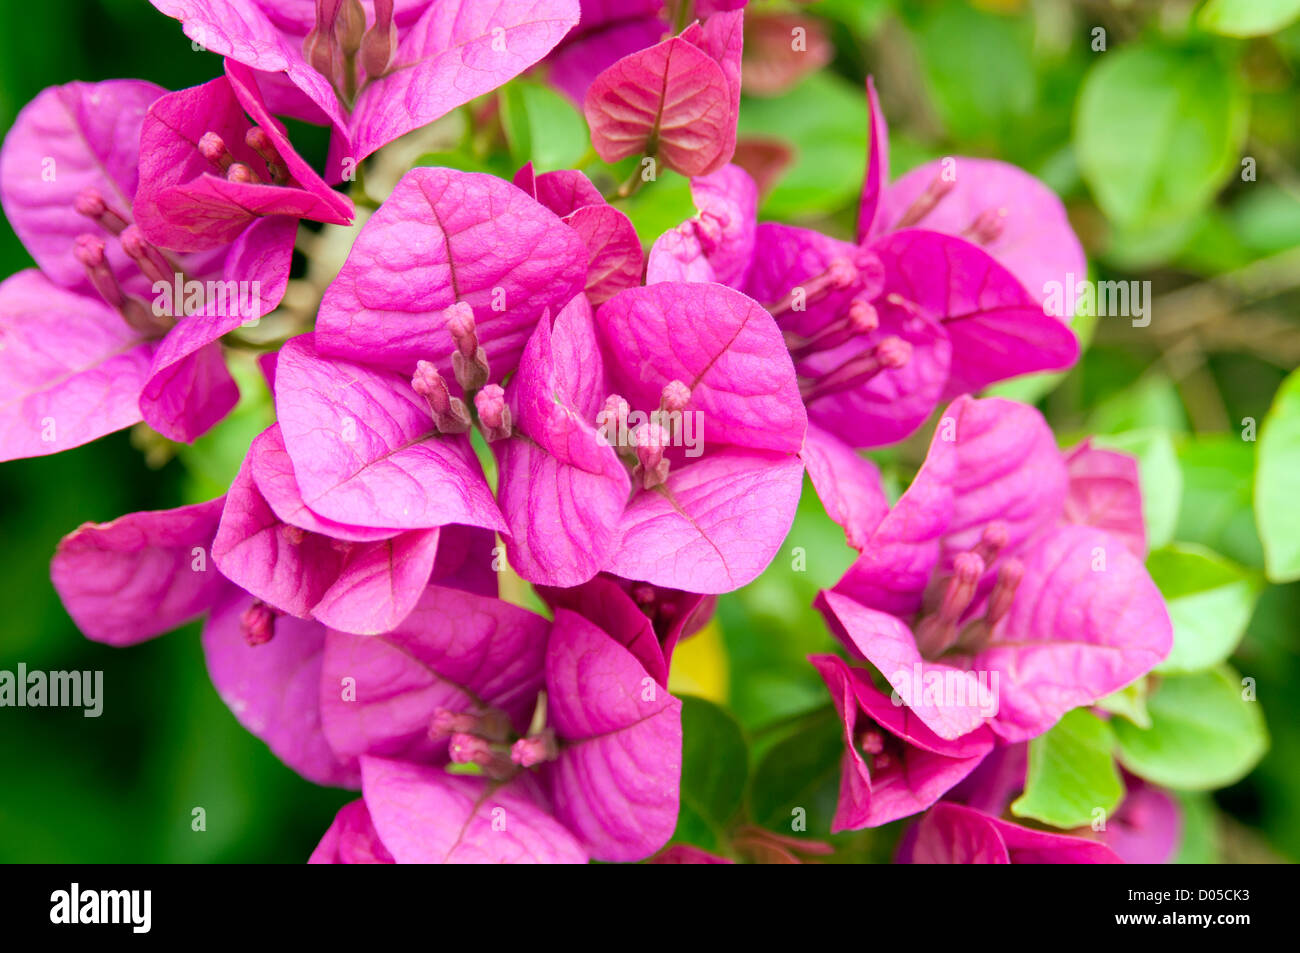 Bougainvillea flowers in bright purple and green Stock Photo